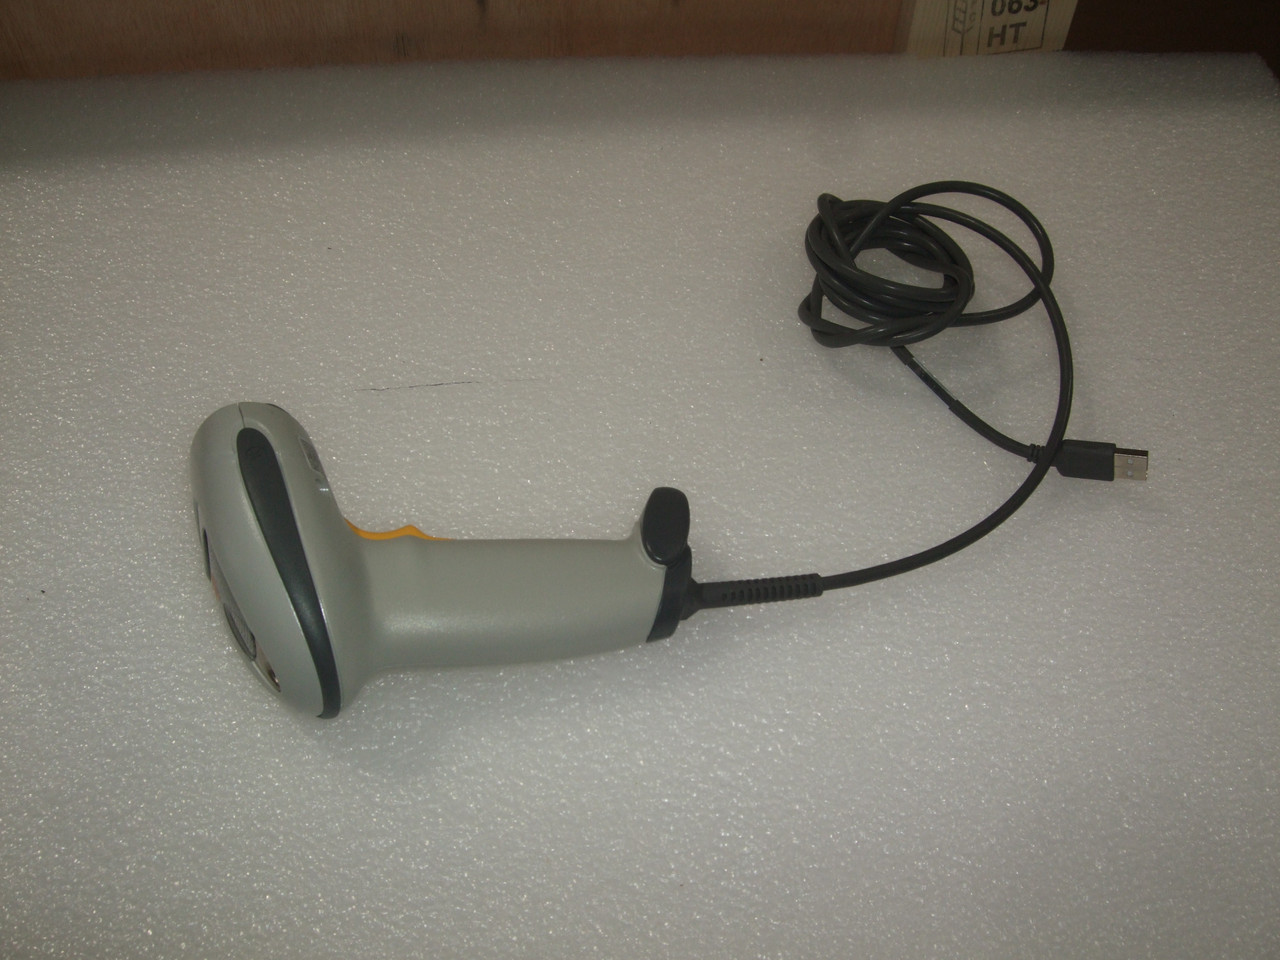 Motorola DS4208-DL00007WR Handheld Barcode Scanner with USB Cable